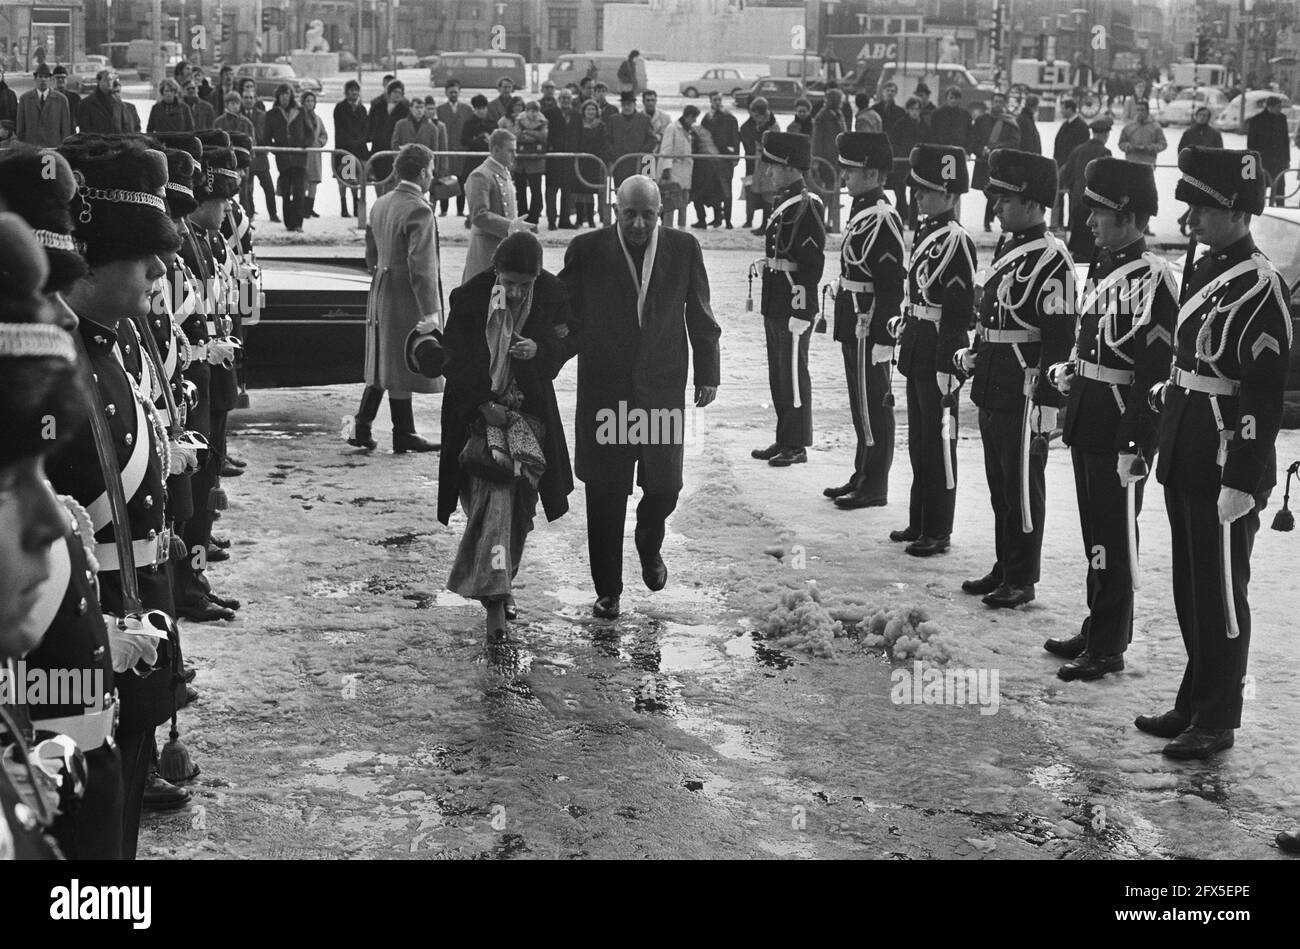 Arrival of the ambassador of India and his wife in the snow, January 7, 1970, ambassadors, wives, The Netherlands, 20th century press agency photo, news to remember, documentary, historic photography 1945-1990, visual stories, human history of the Twentieth Century, capturing moments in time Stock Photo